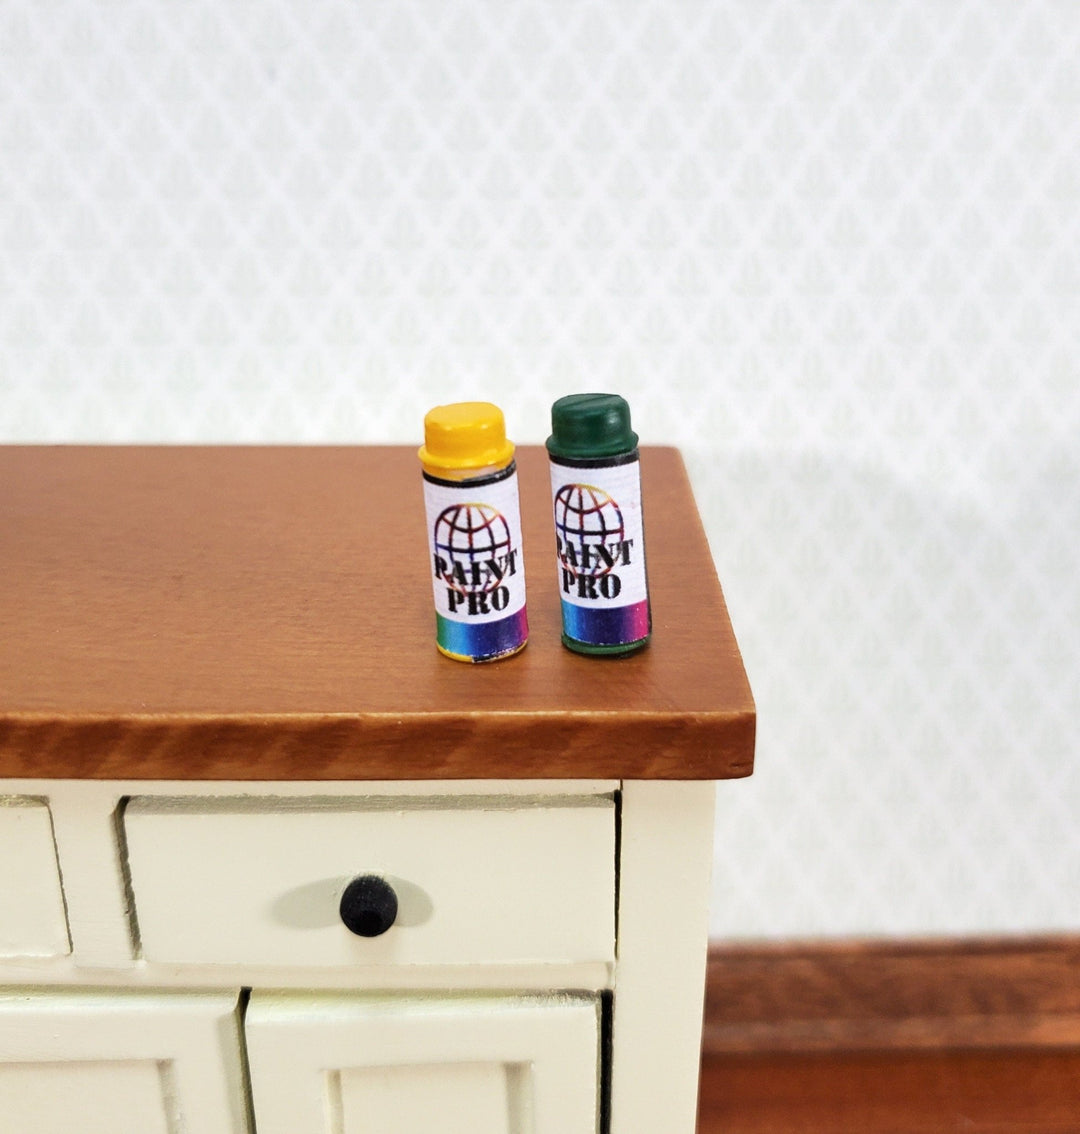 Miniature Spray Paint Cans Set of Two Yellow & Green 1:12 Scale Modern Dollhouse - Miniature Crush